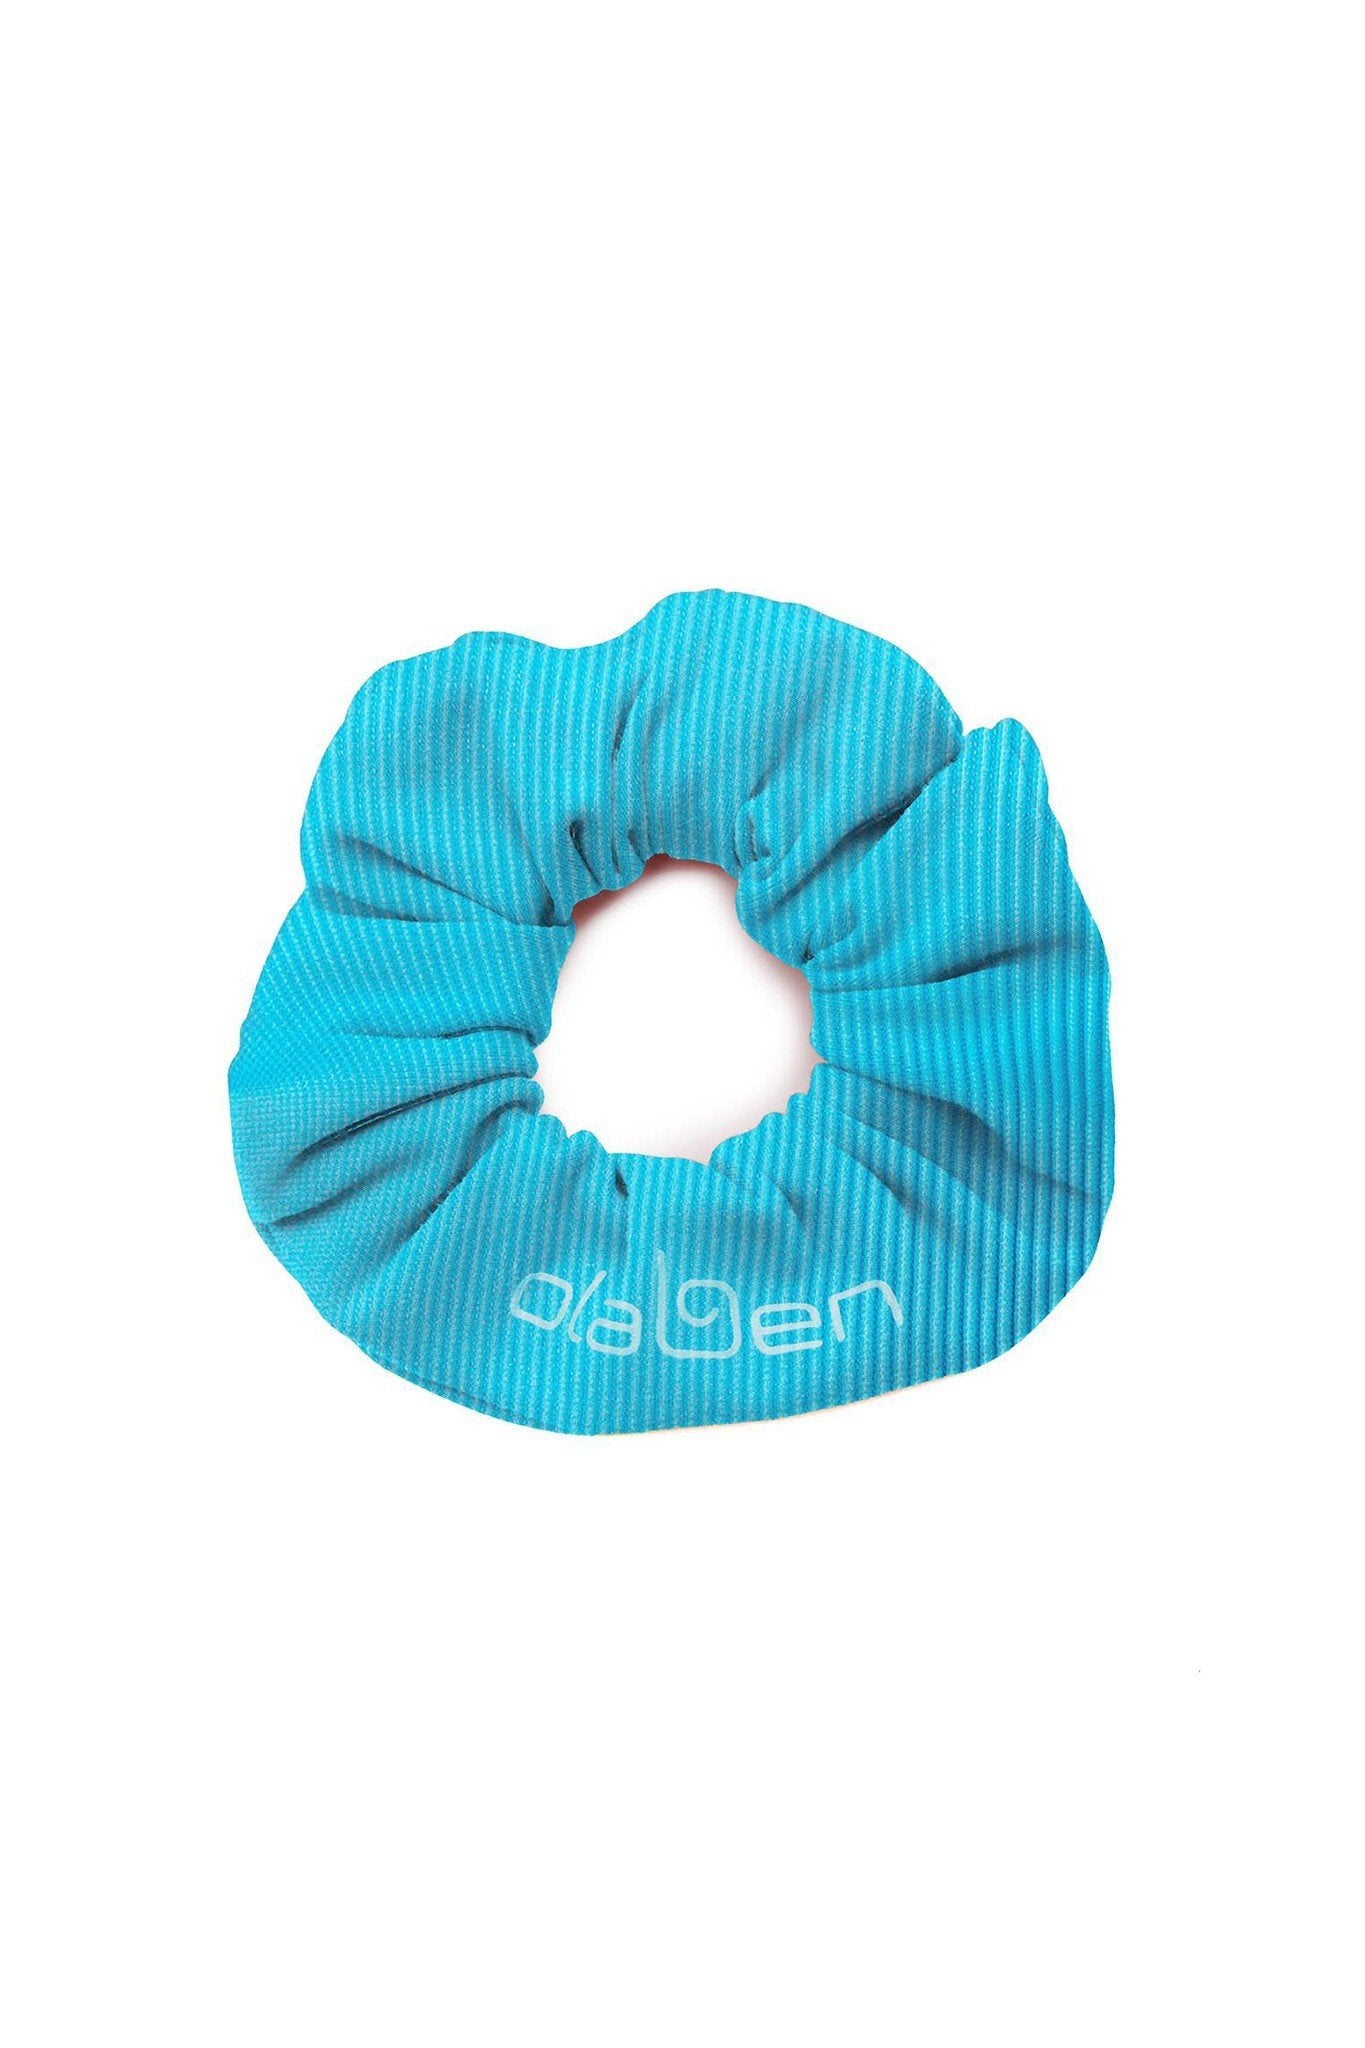 Blue Pacific Blue Scrunchie Headwear - Fashionable accessory for a stylish look.